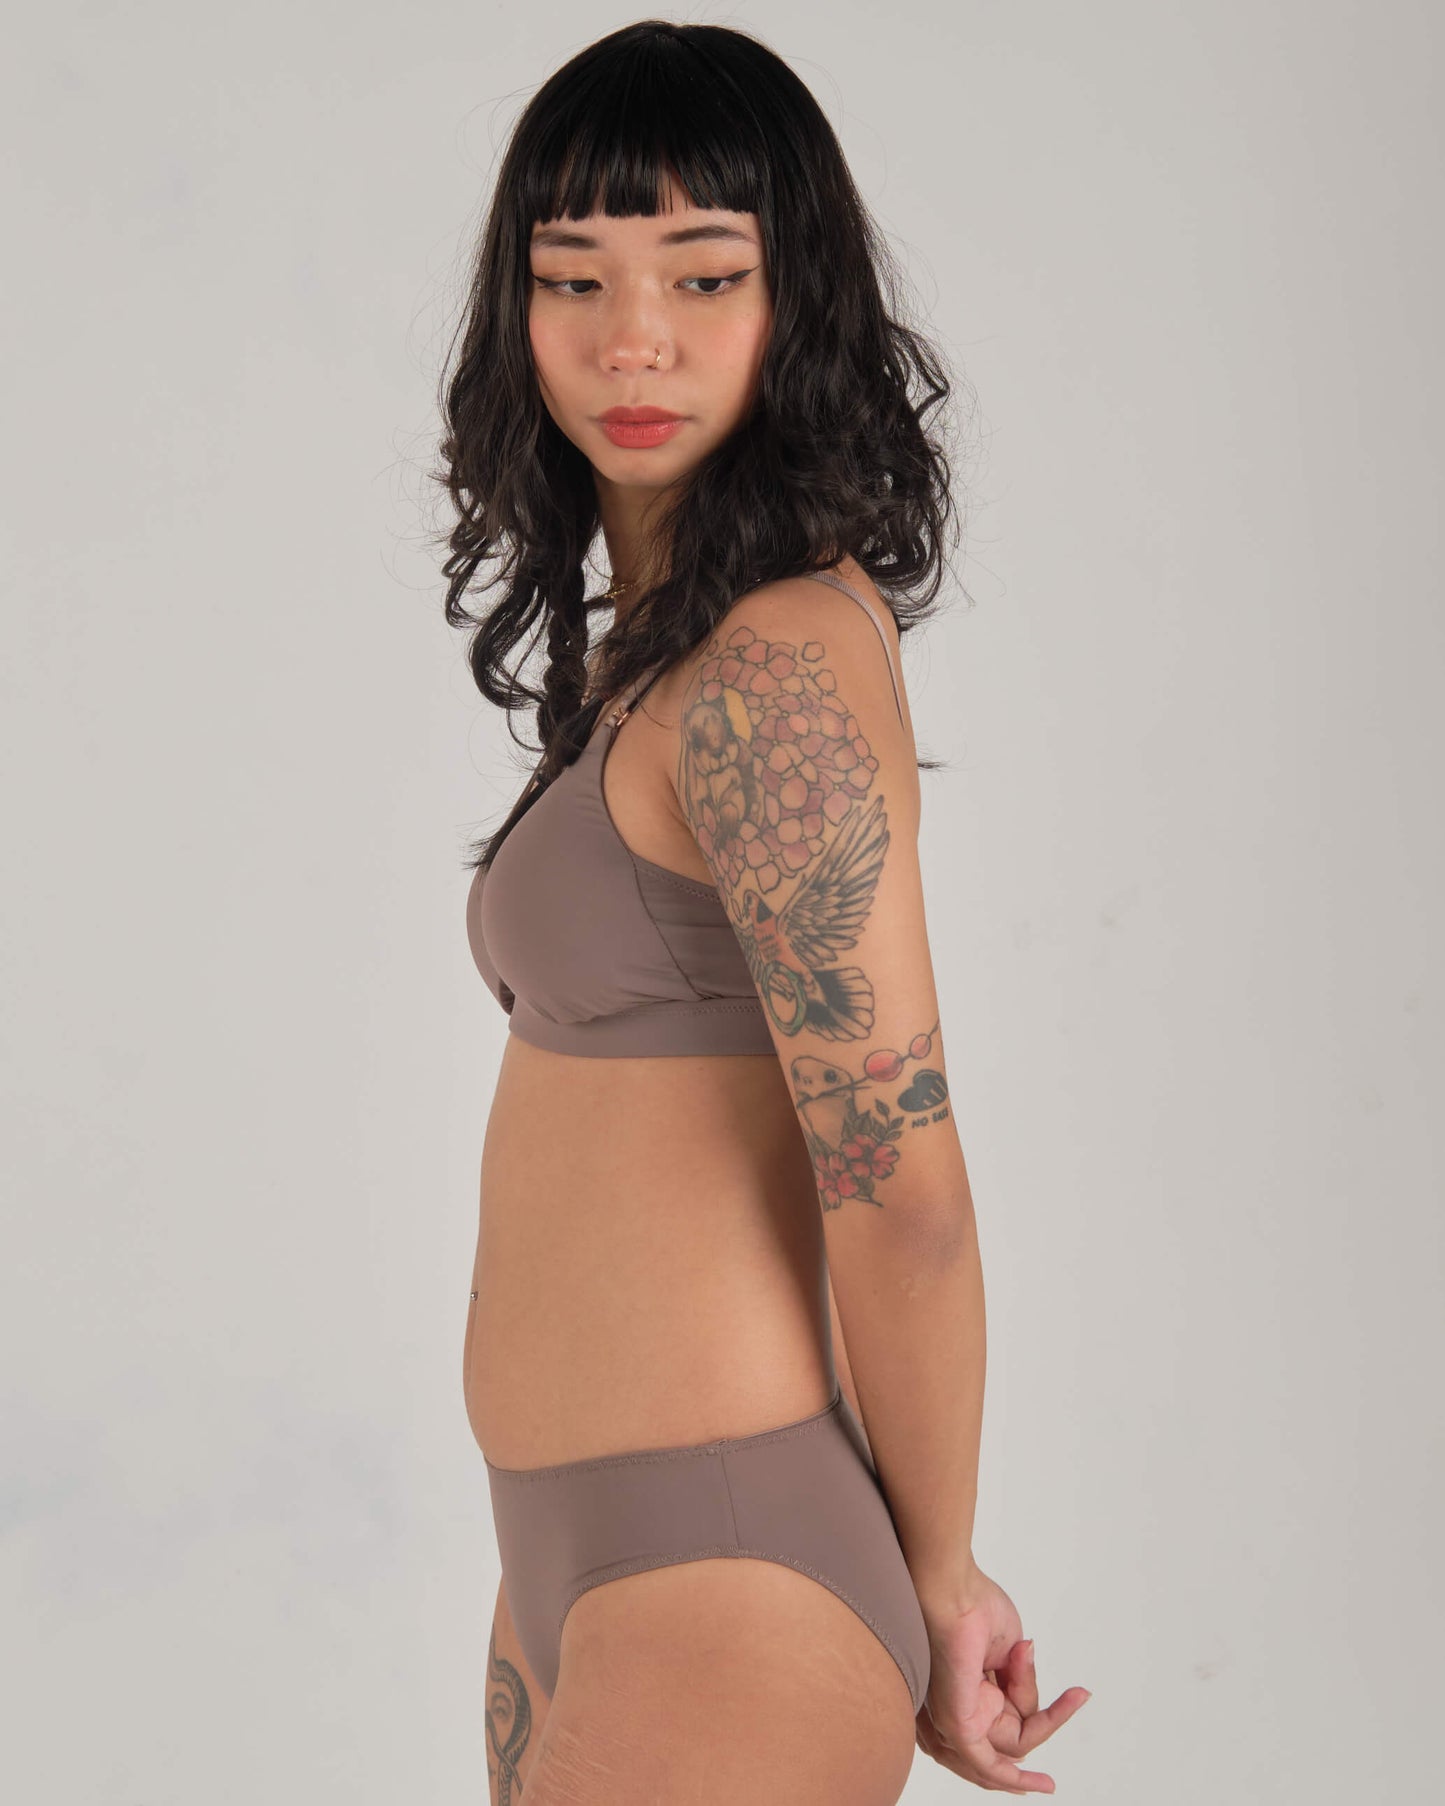 elevated basics panty in #67